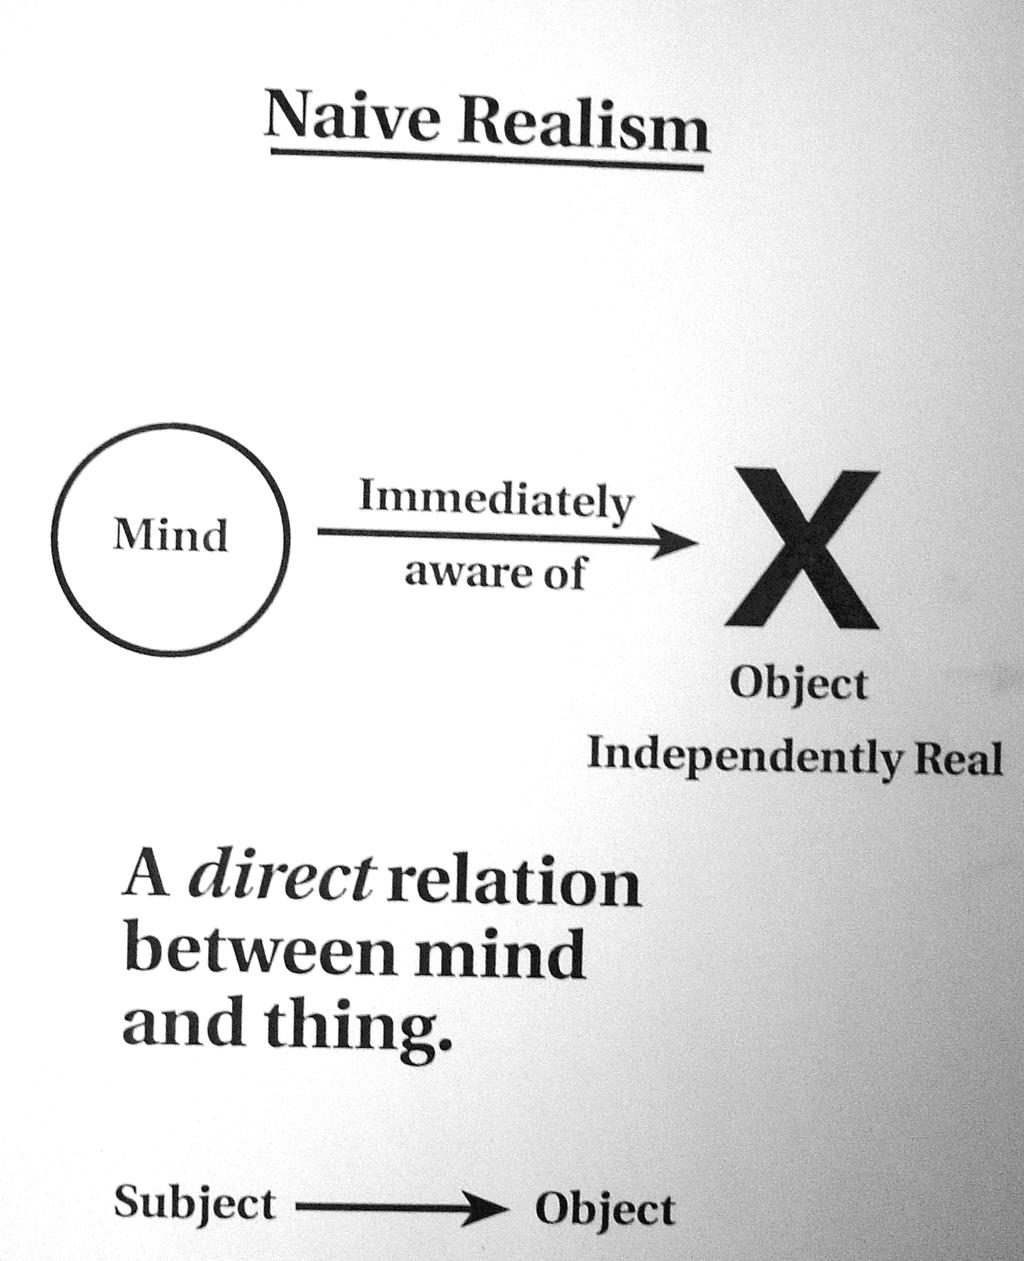 Time and space (as well as the objects in them) are thus at once empirically real (real within the realm of how we necessarily experience things) and yet transcendentally ideal (not parts of reality